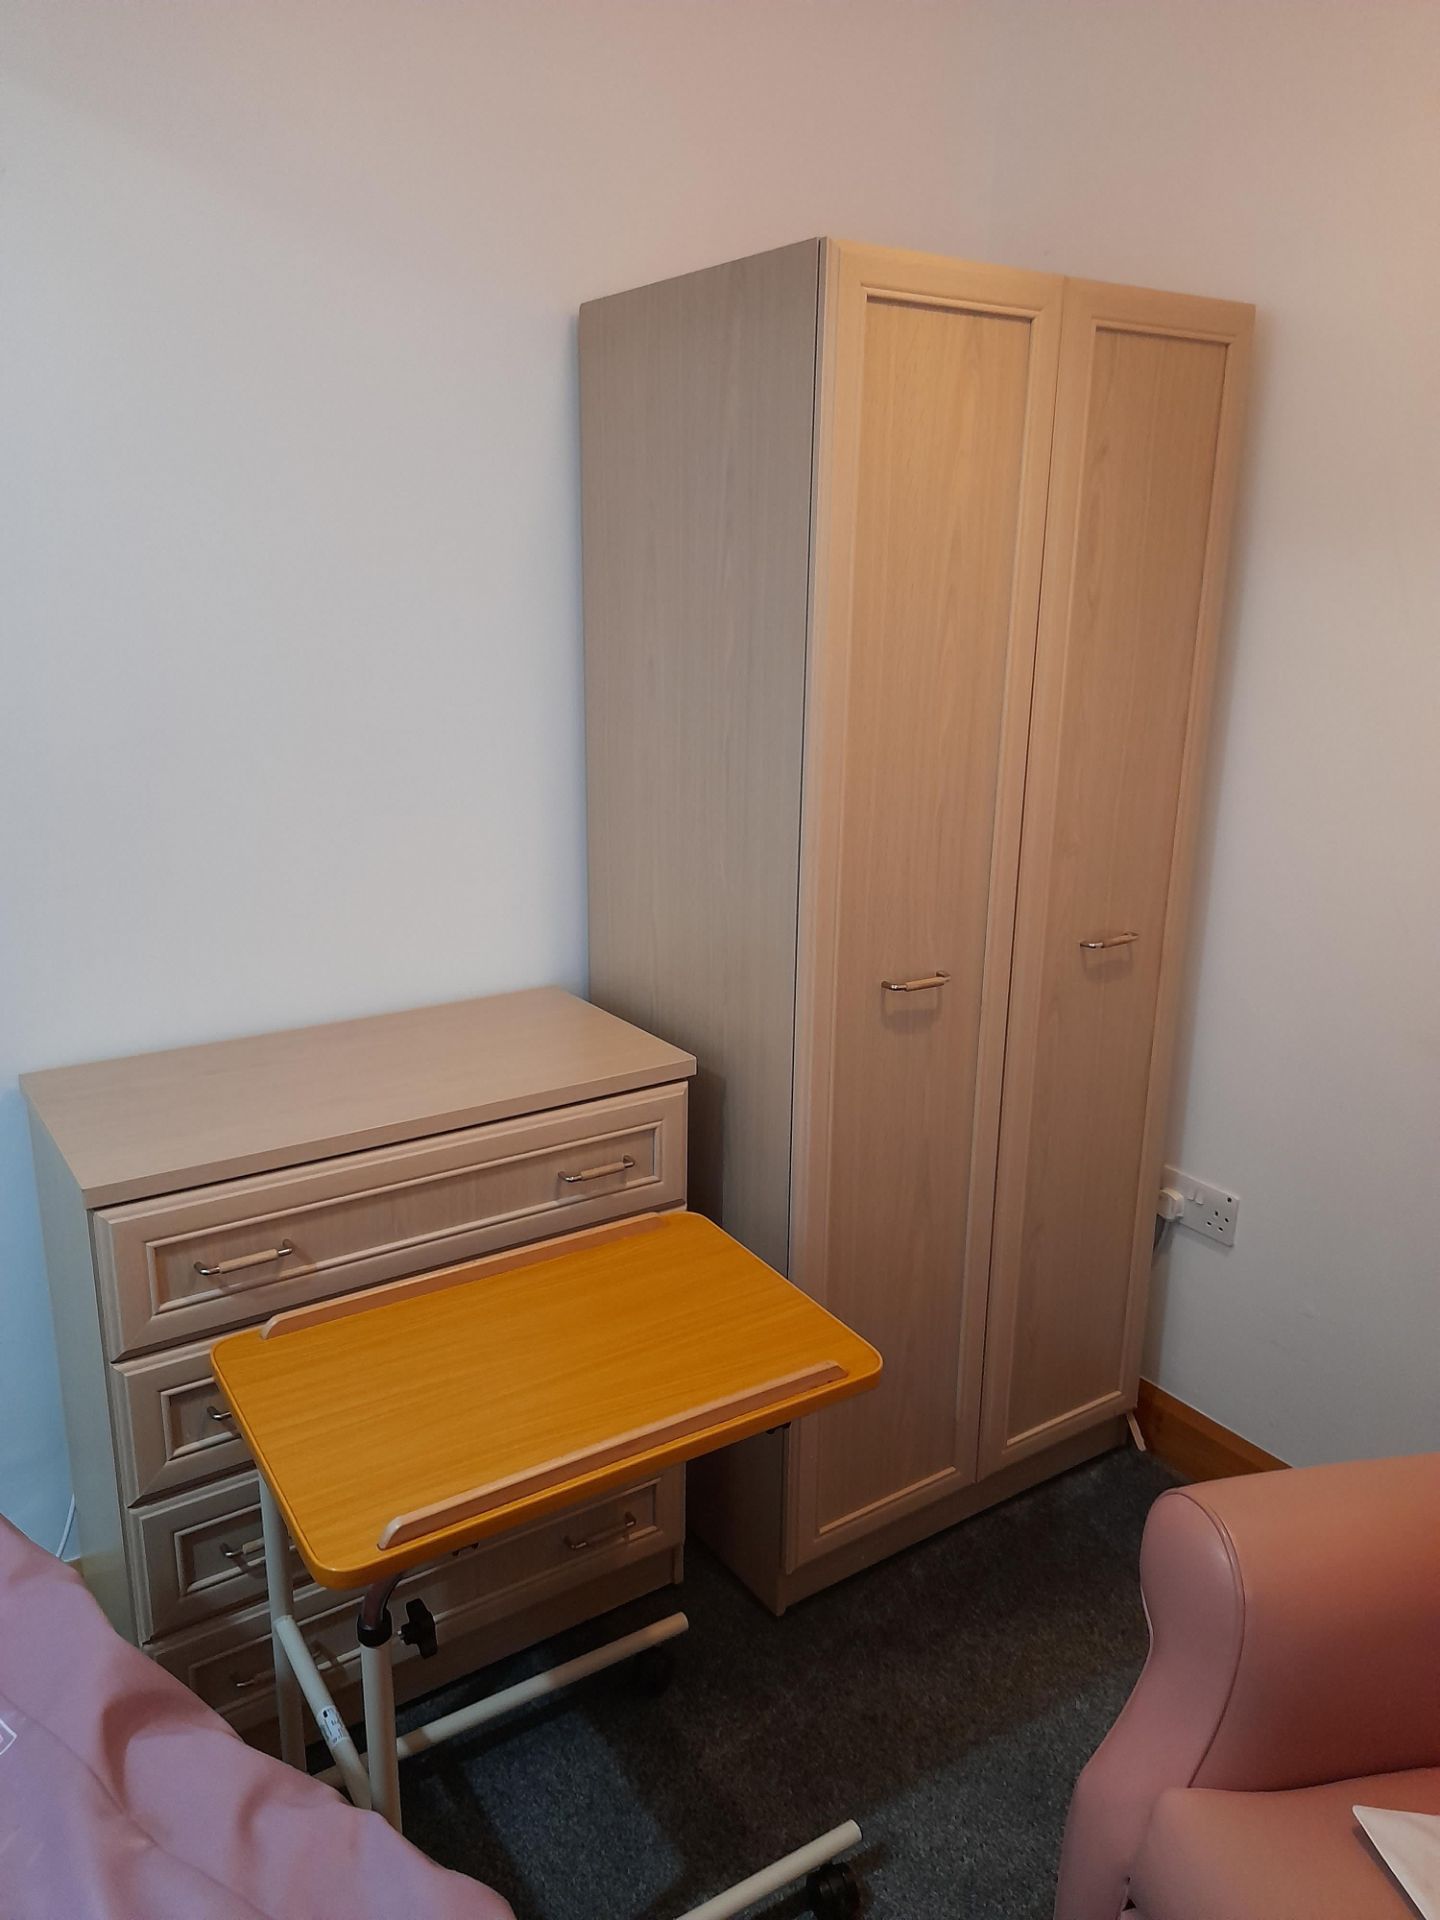 Contents of Bedroom 11 to include; Profile bed with Mattress, Wardrobe, Chest of Drawers, Bedside - Image 3 of 3